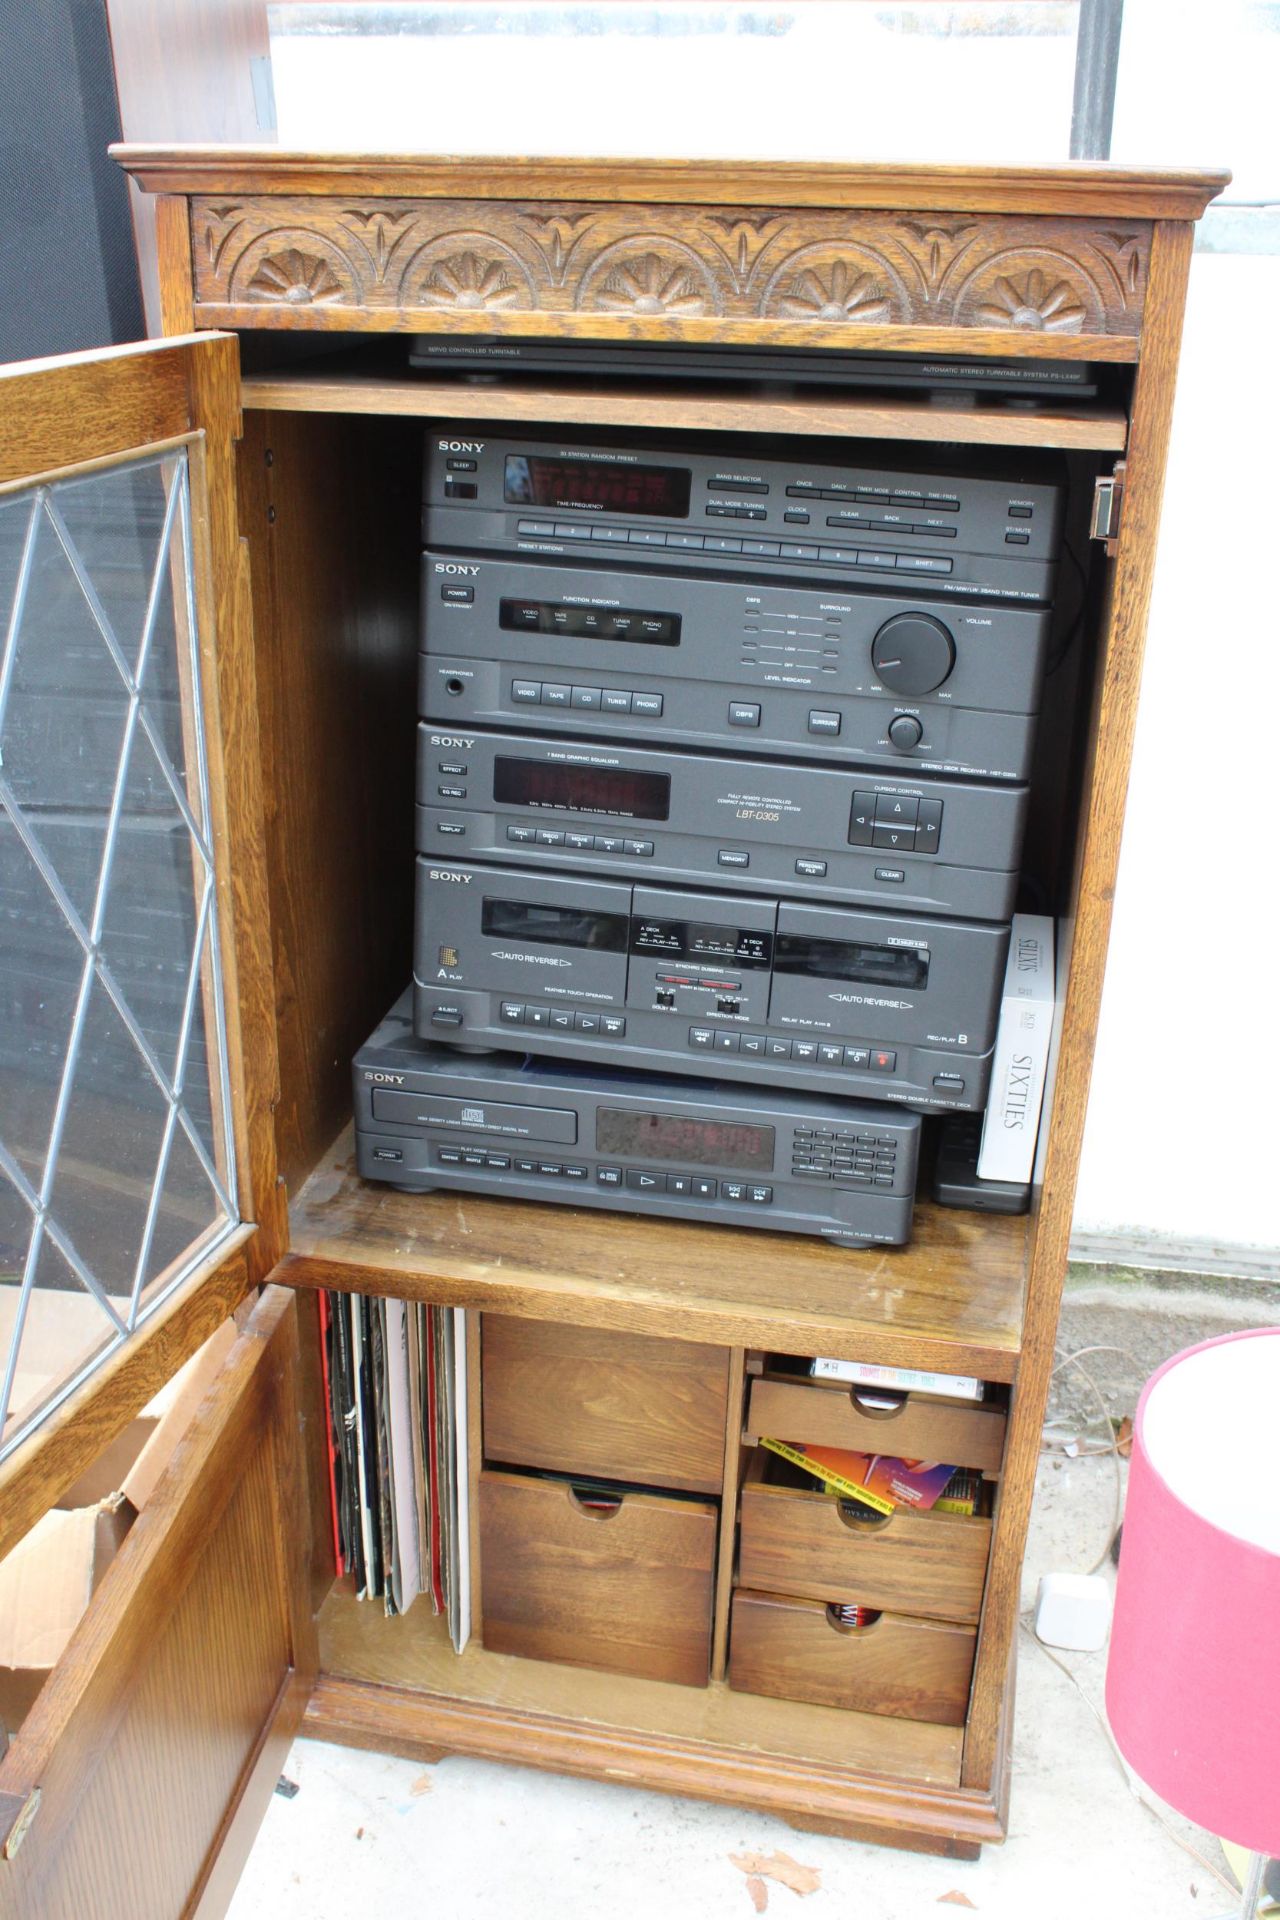 AN OAK RECORD CABINET CONTAINING A SONY COMPACT HI-FI STEREO SYSTEM - Bild 2 aus 2